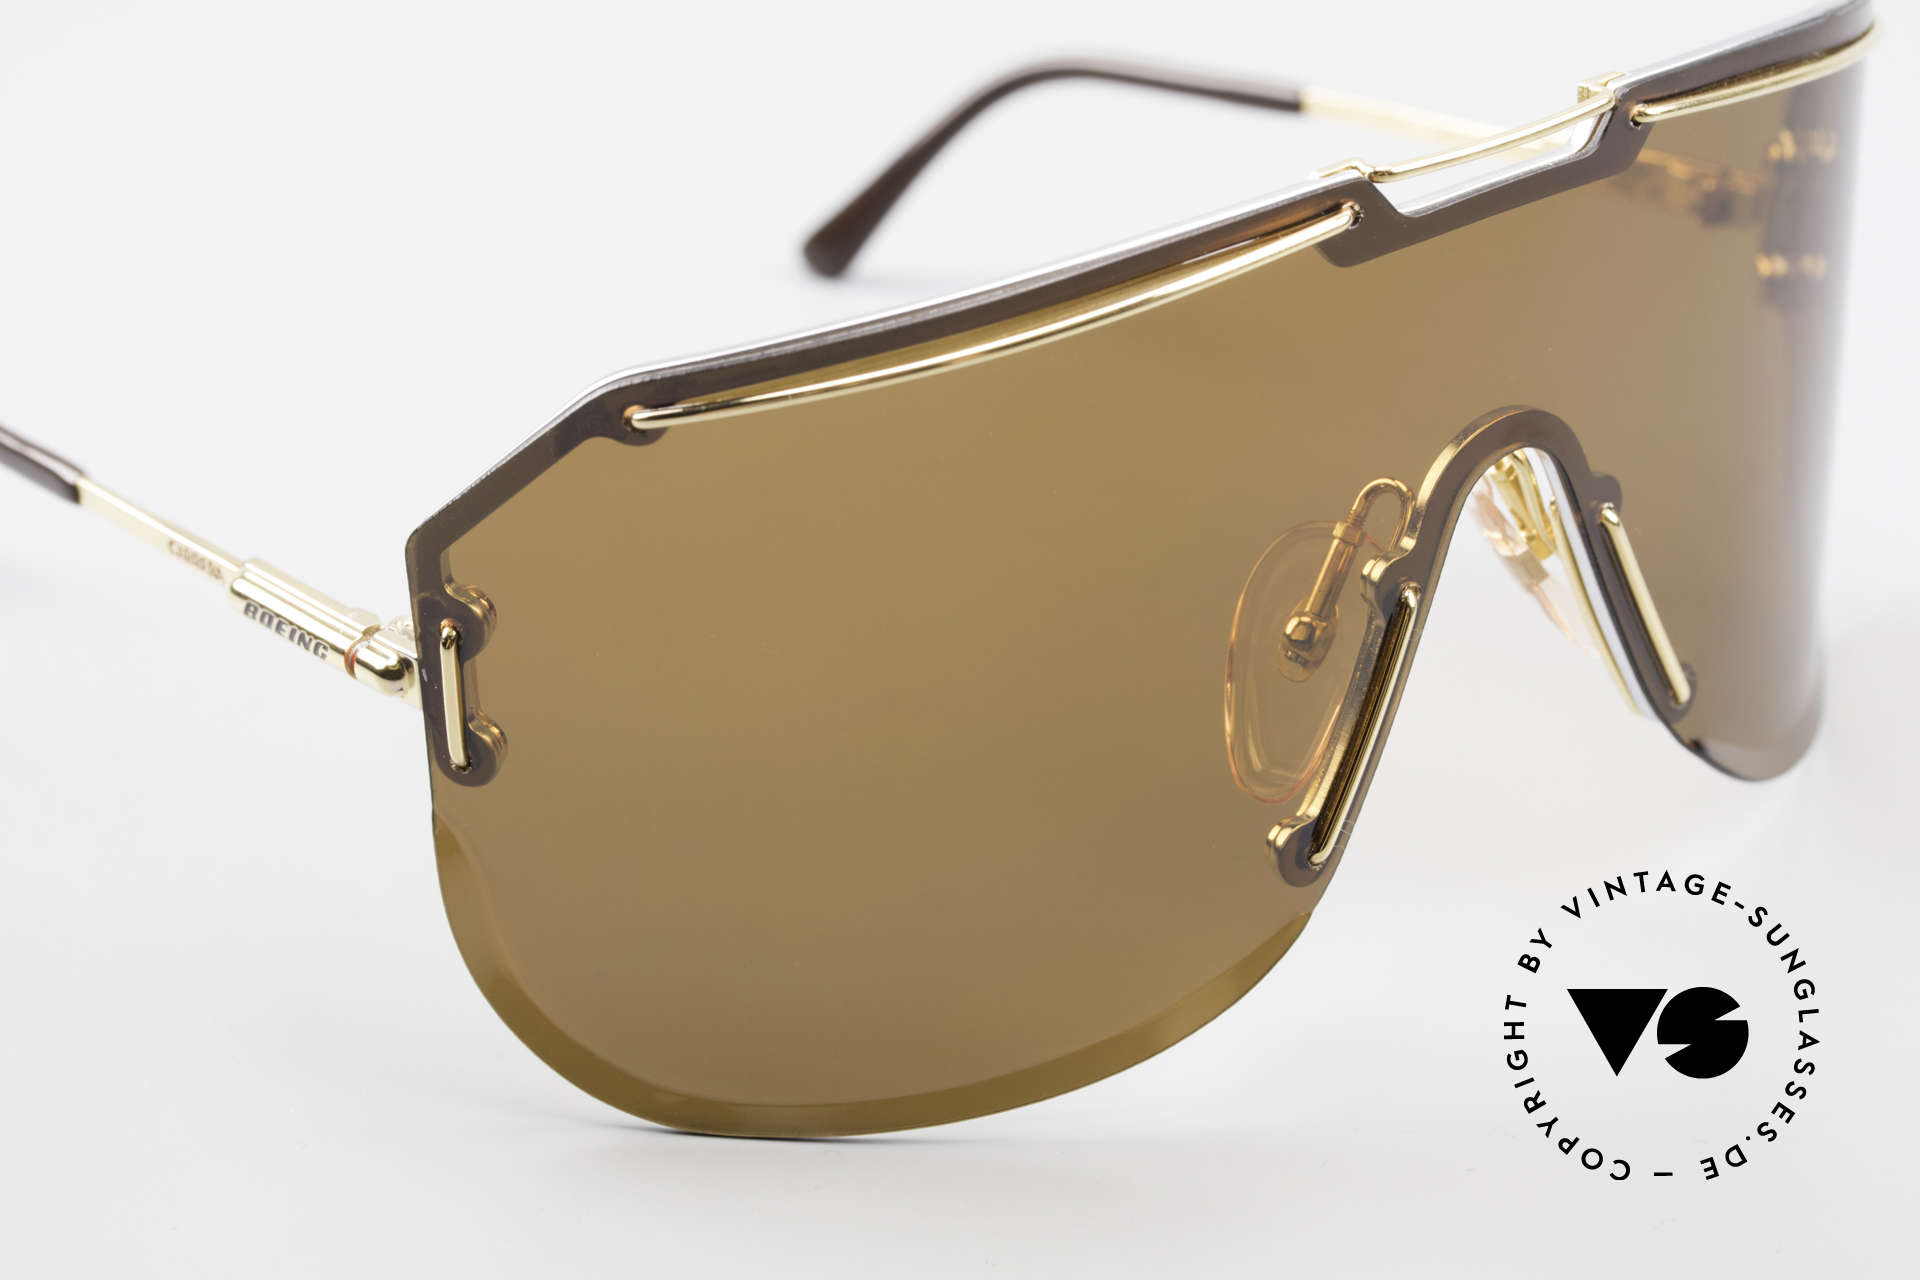 Boeing 5703 80's Luxury Pilots Shades, he also created the Porsche 5620 'Yoko Ono' sunglasses, Made for Men